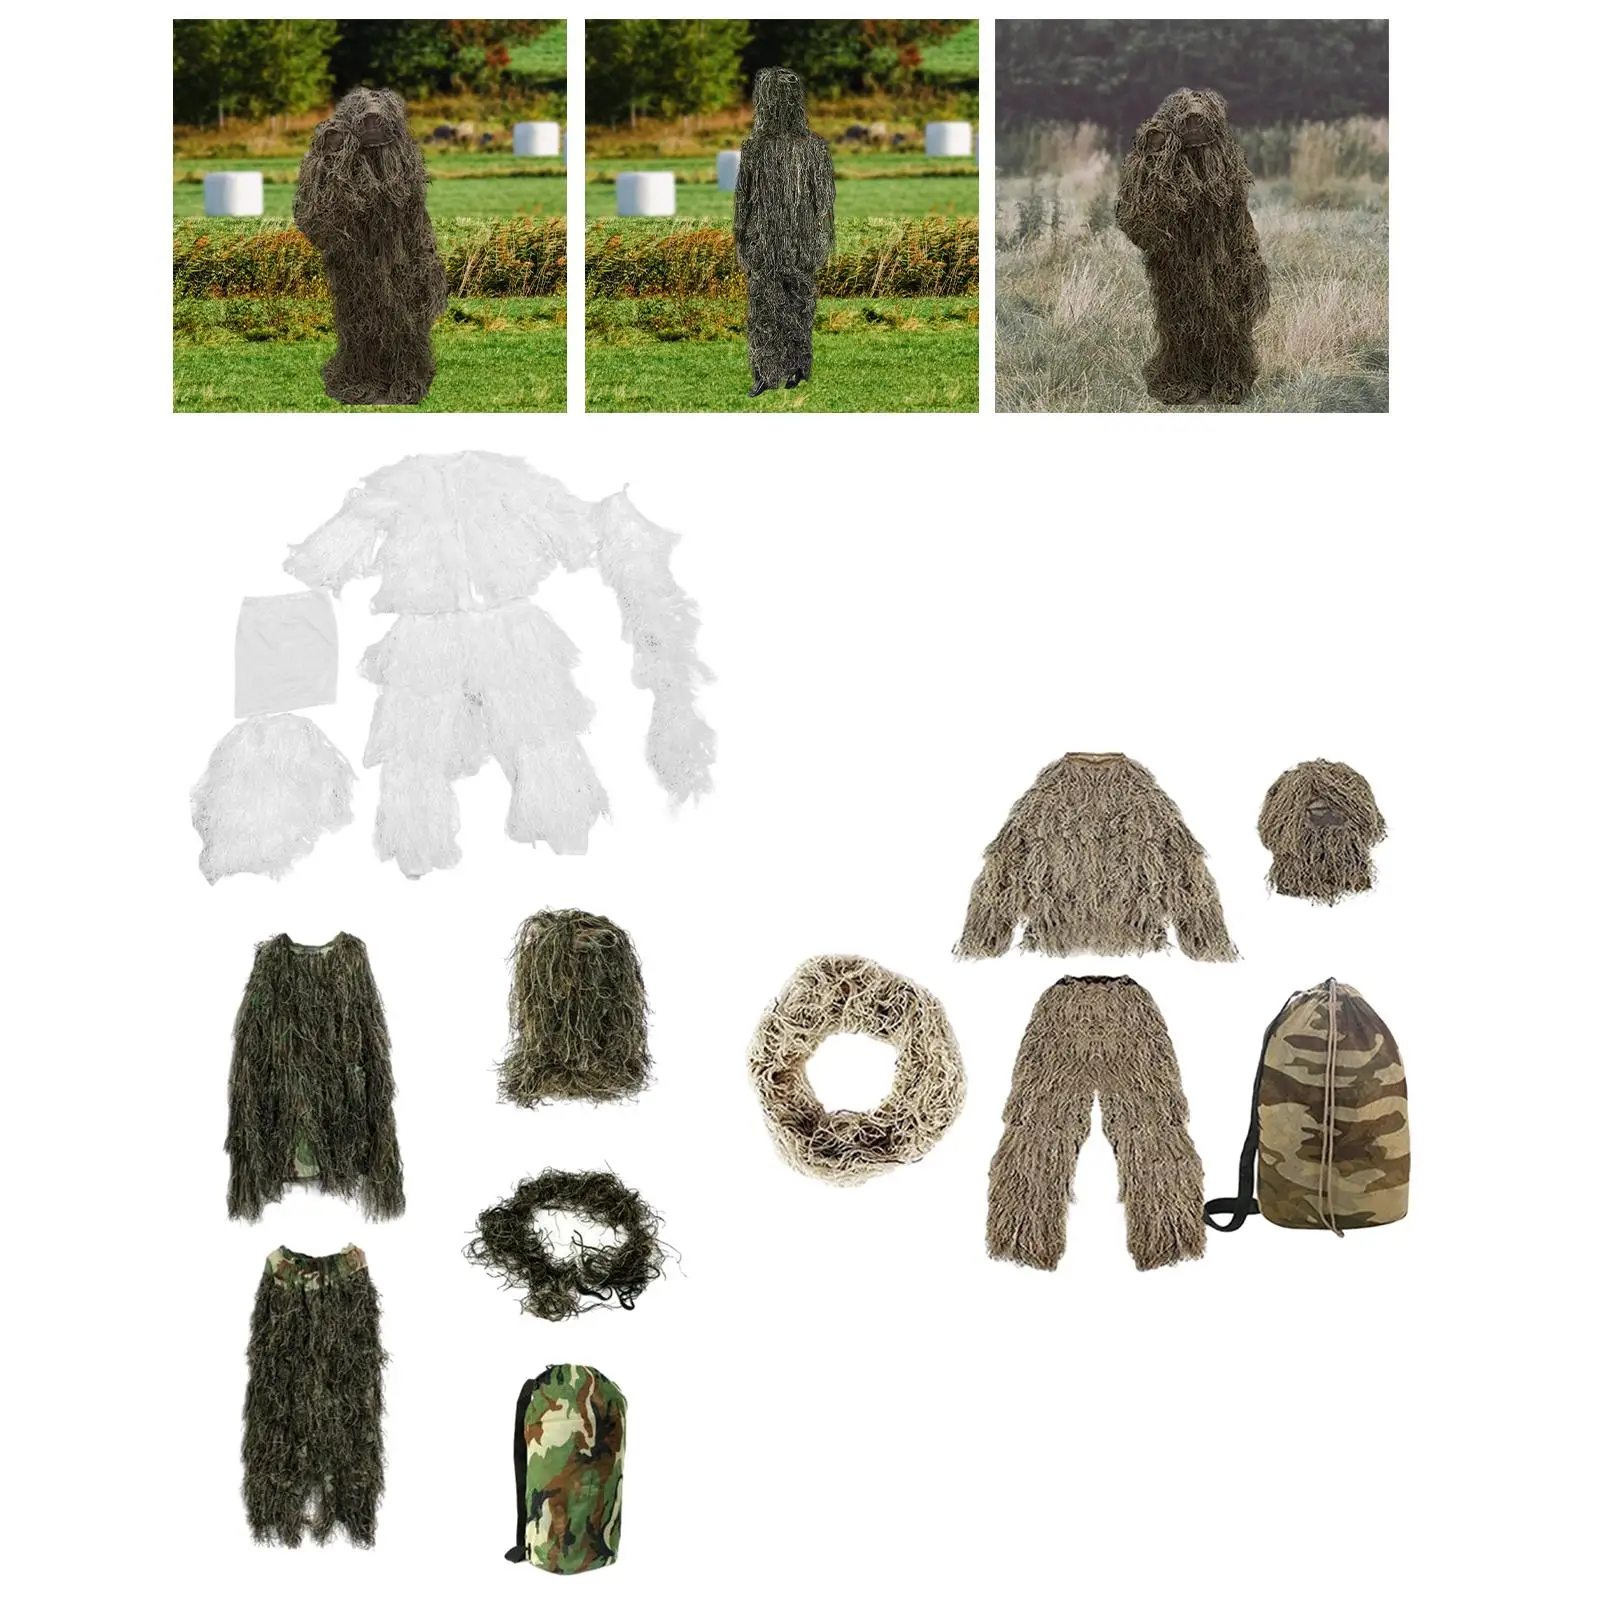 Children Ghillie Suit Lightweight Disguise Clothing for Game Hunting Jungle